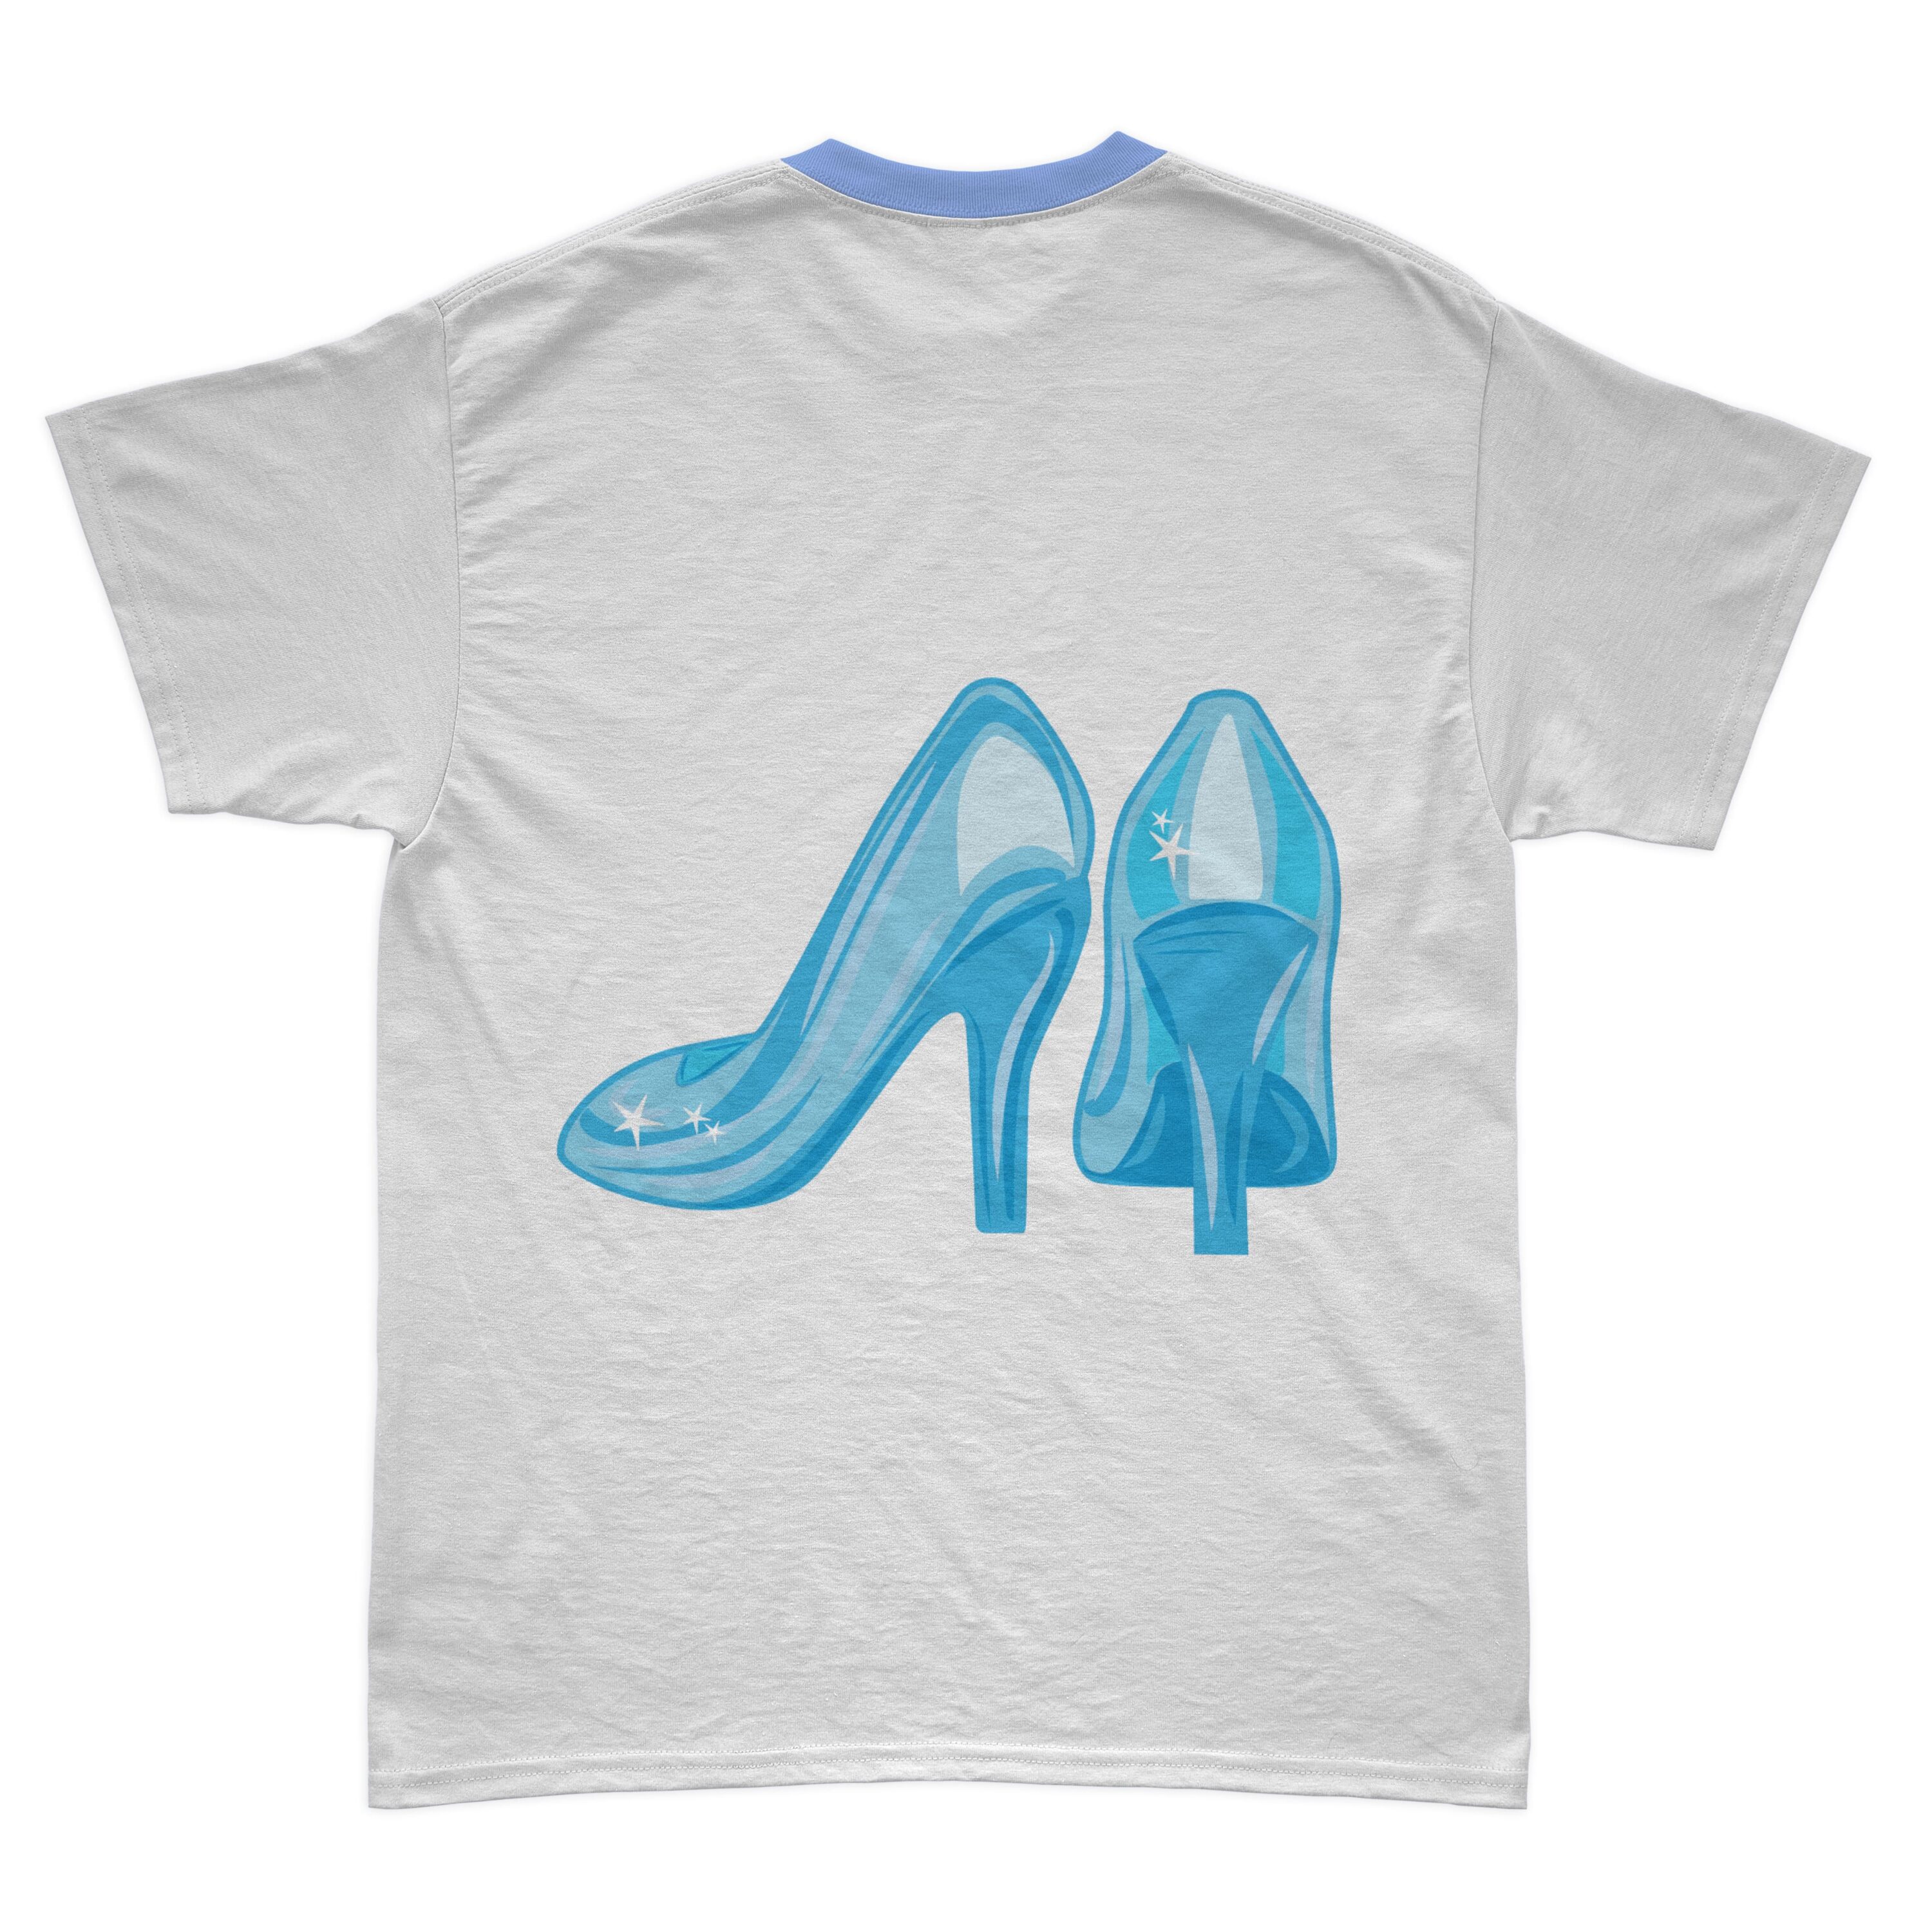 Image of a white t-shirt with an irresistible print of Cinderella's crystal shoes.